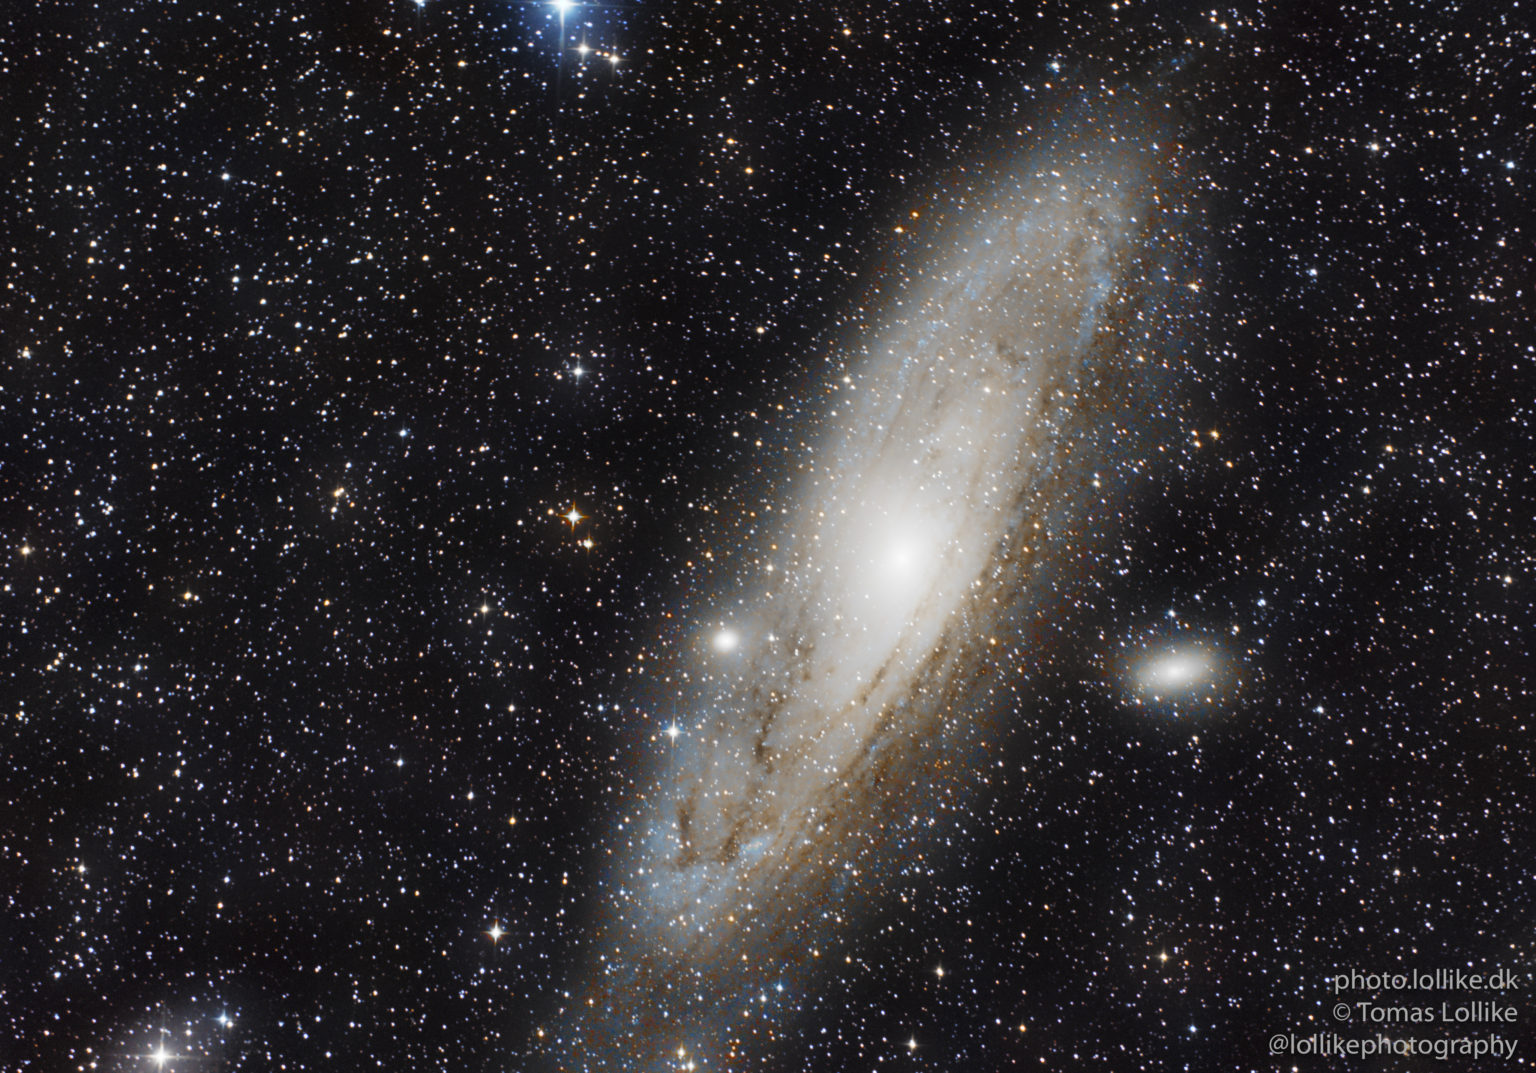 My best image of Andromeda yet!